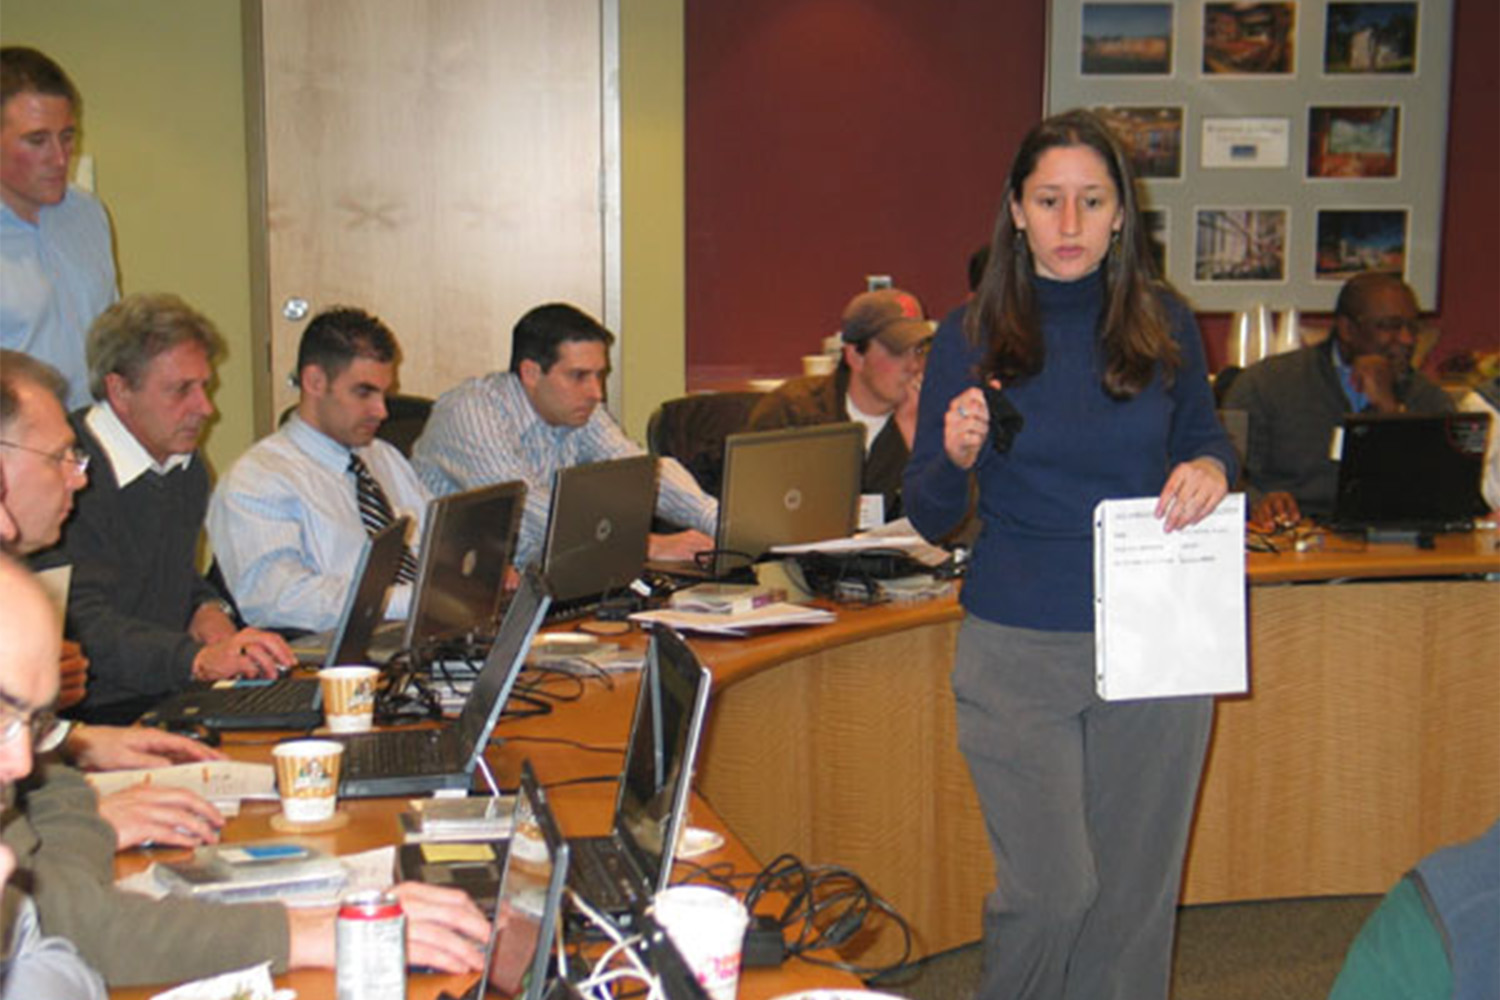 Laura handler delivering a presentation to an audience 